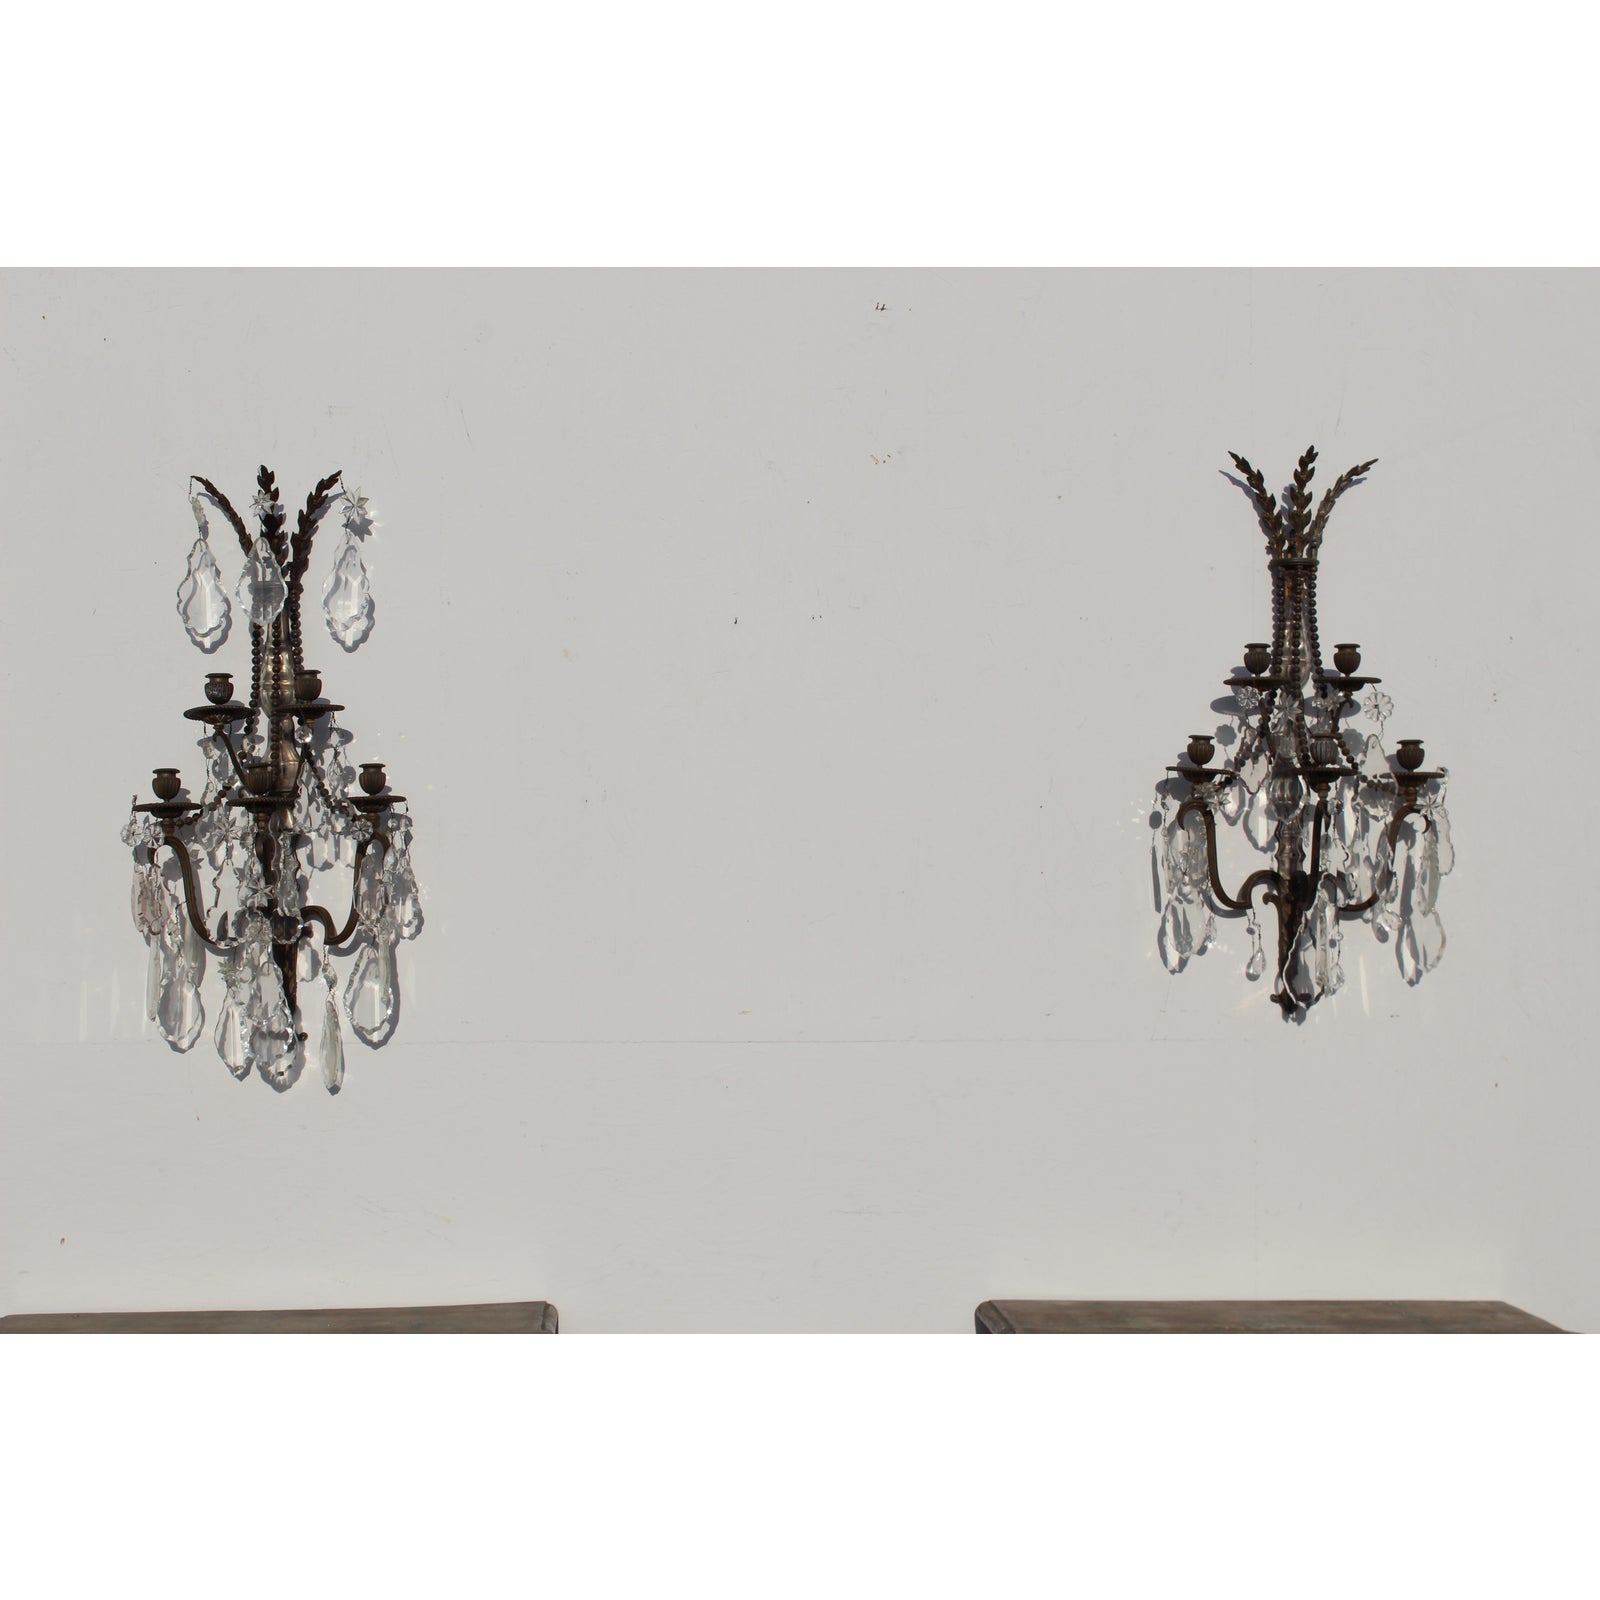 19th-century-baccarat-french-louis-xvi-style-crystal-sconces-a-pair-7371